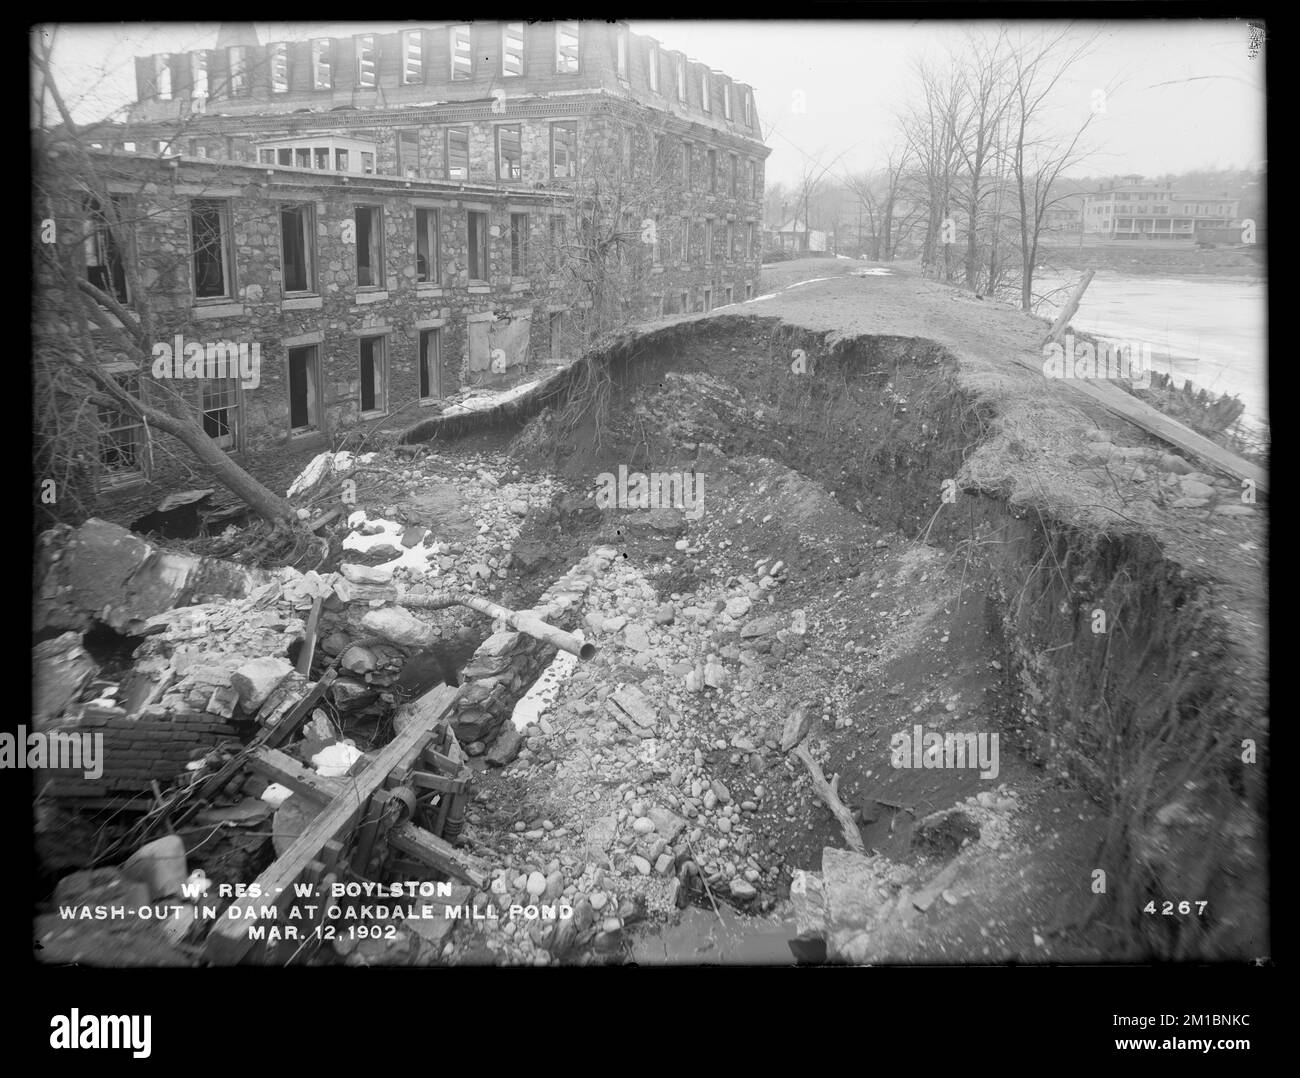 Wachusett Reservoir, wash-out in dam at Oakdale mill pond, mill in background, West Boylston, Mass., Mar. 12, 1902 , waterworks, reservoirs water distribution structures, construction sites, mills buildings Stock Photo